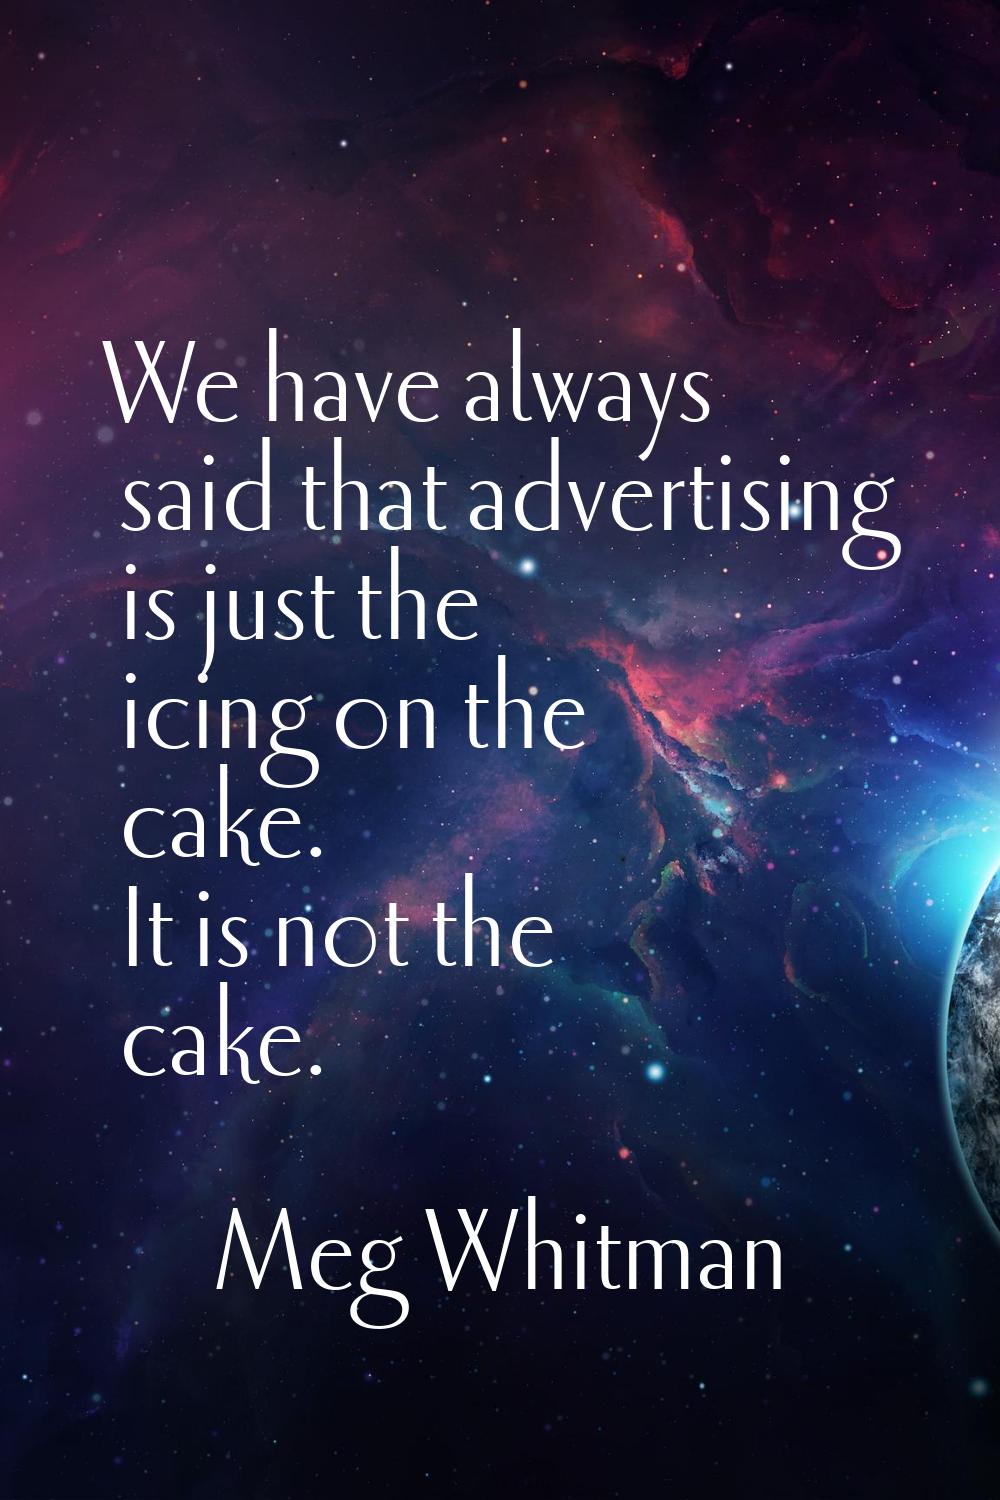 We have always said that advertising is just the icing on the cake. It is not the cake.